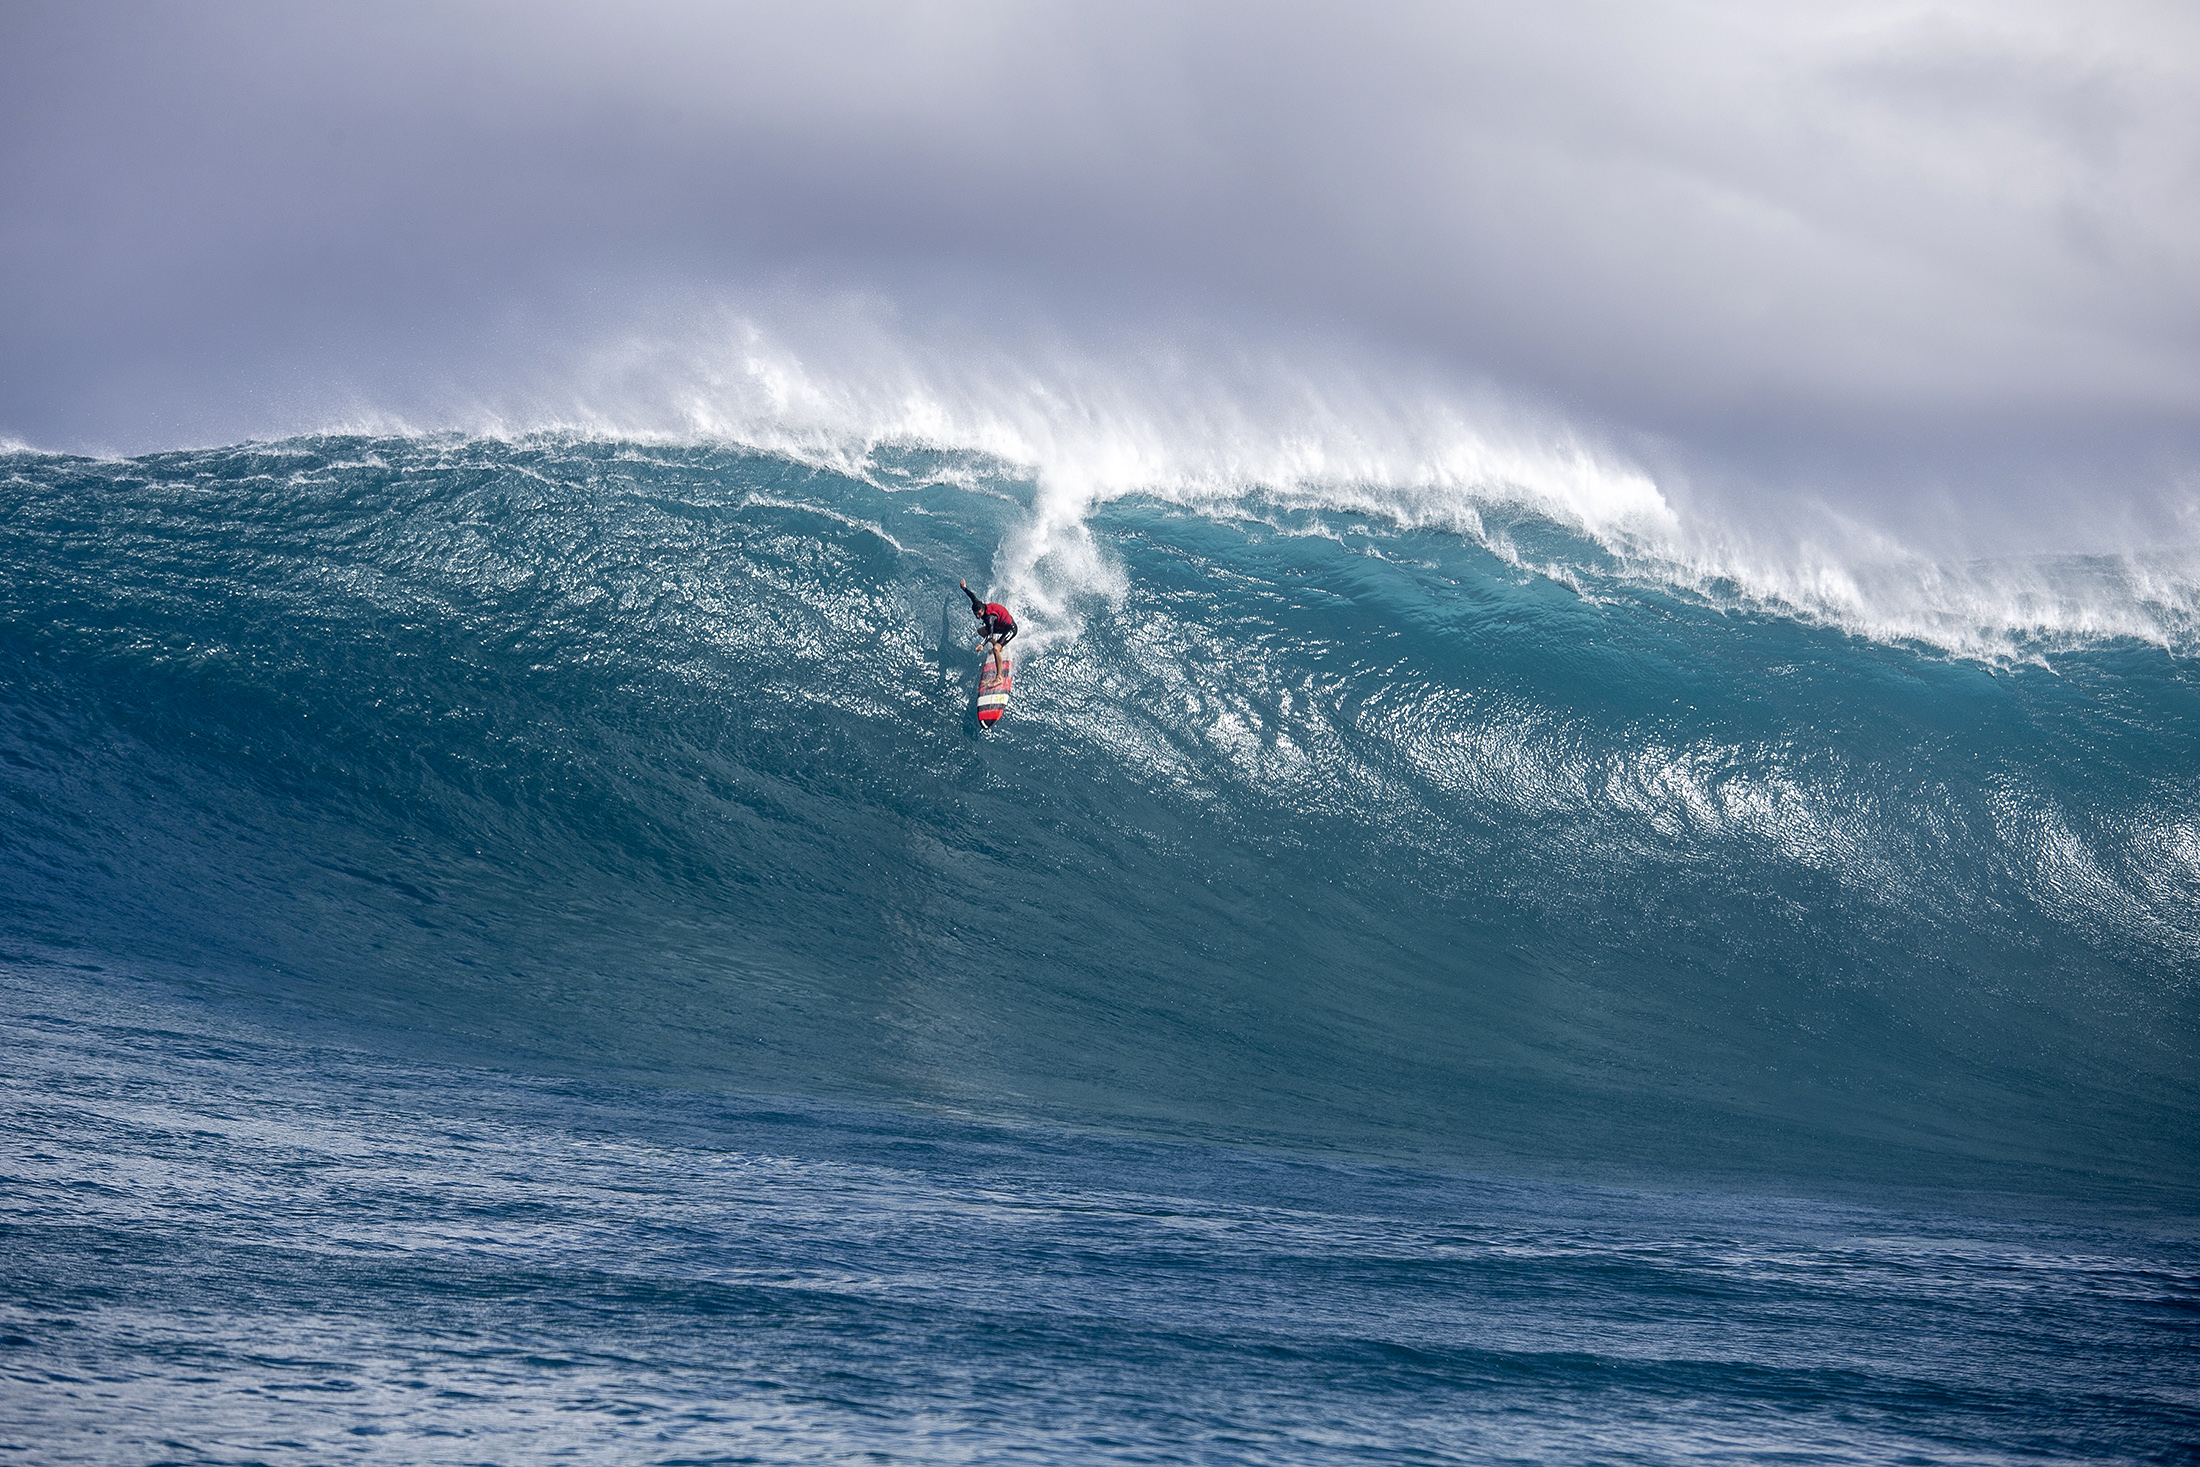 Big swell at Pe'ahi (Jaws) Maui. The stars aligned on December 31st 2019  with a